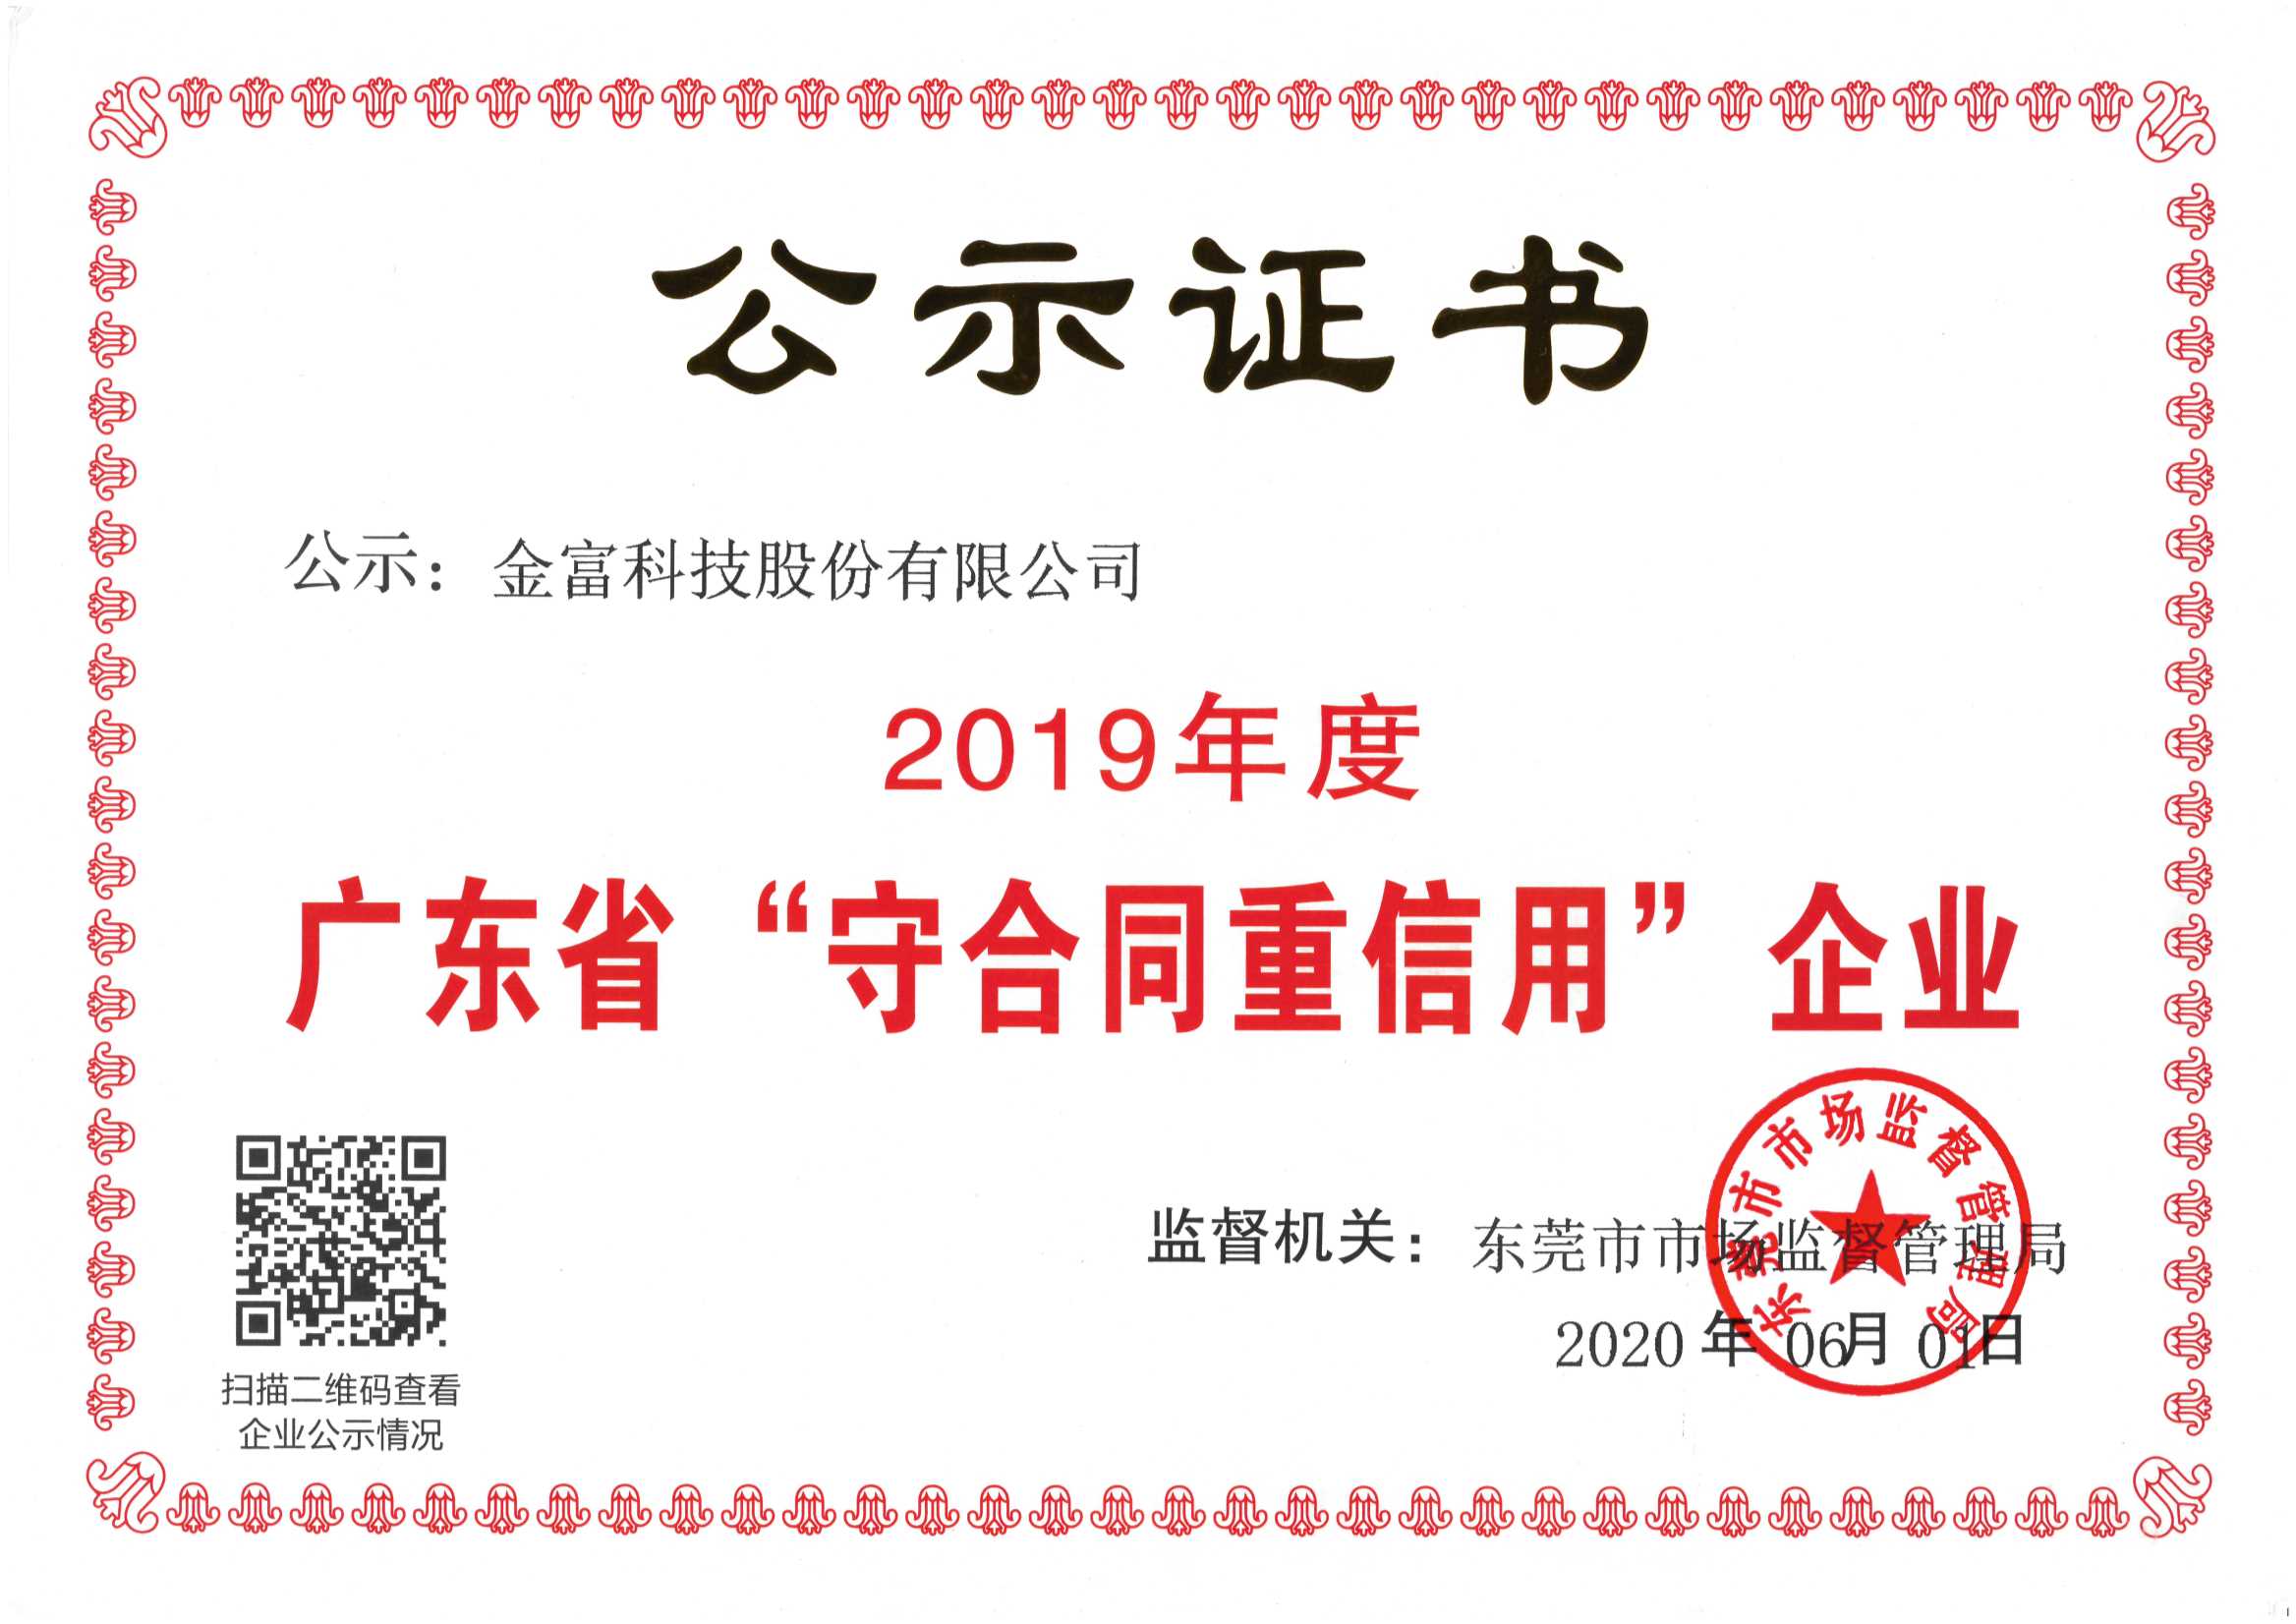 2019 Guangdong Province "Keeping Contracts and Reputation" Enterprise Public Notice Certificate